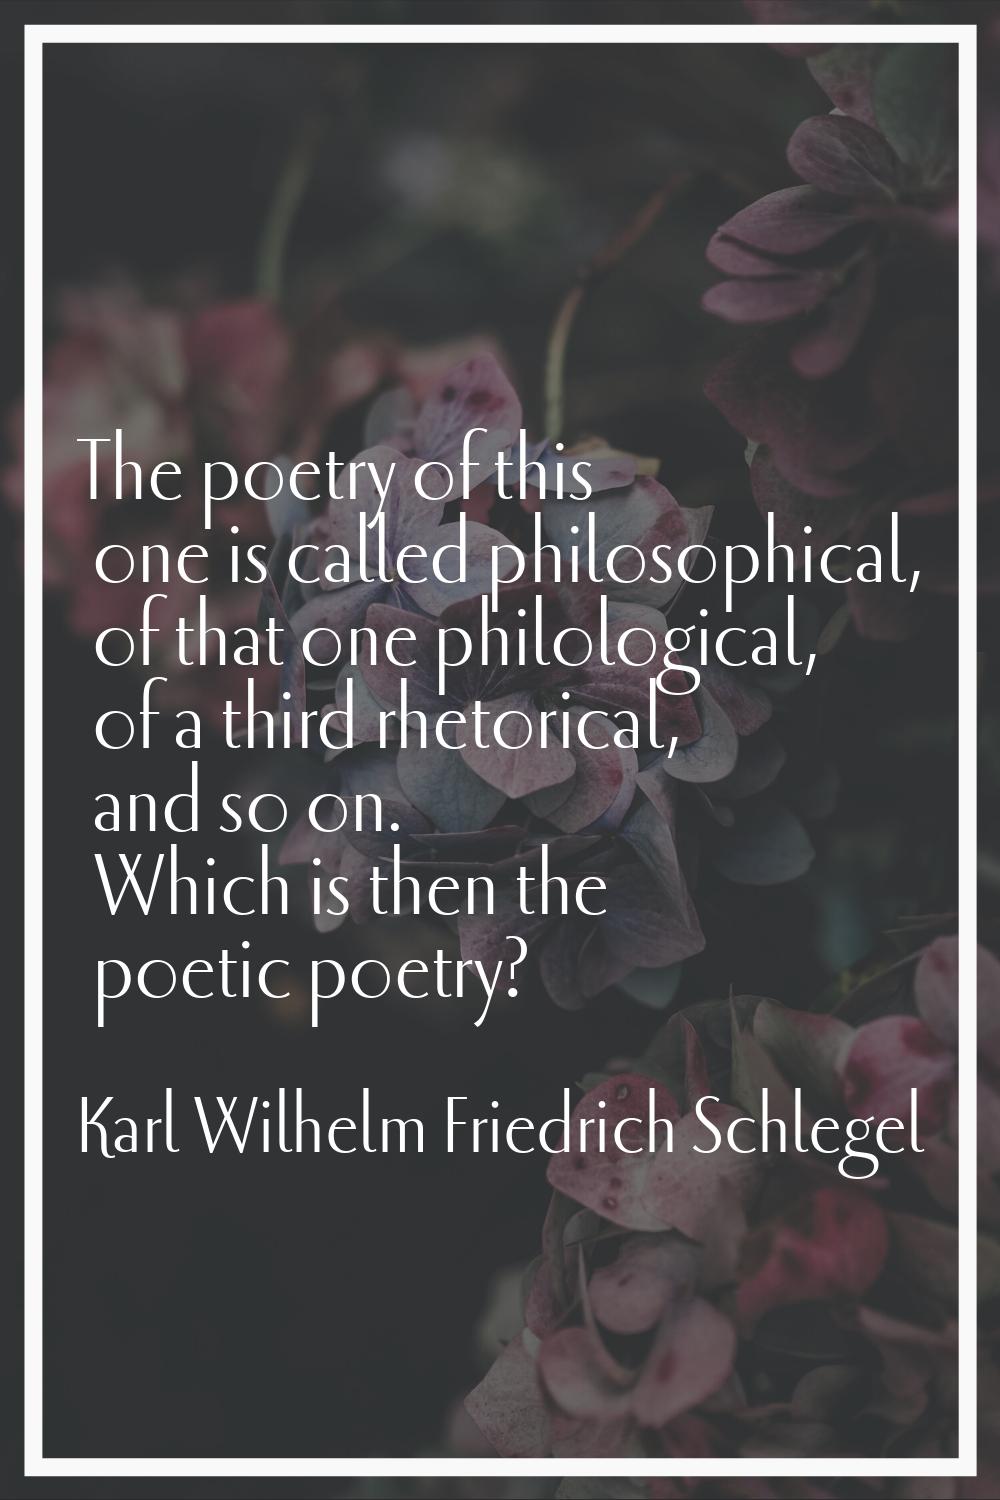 The poetry of this one is called philosophical, of that one philological, of a third rhetorical, an